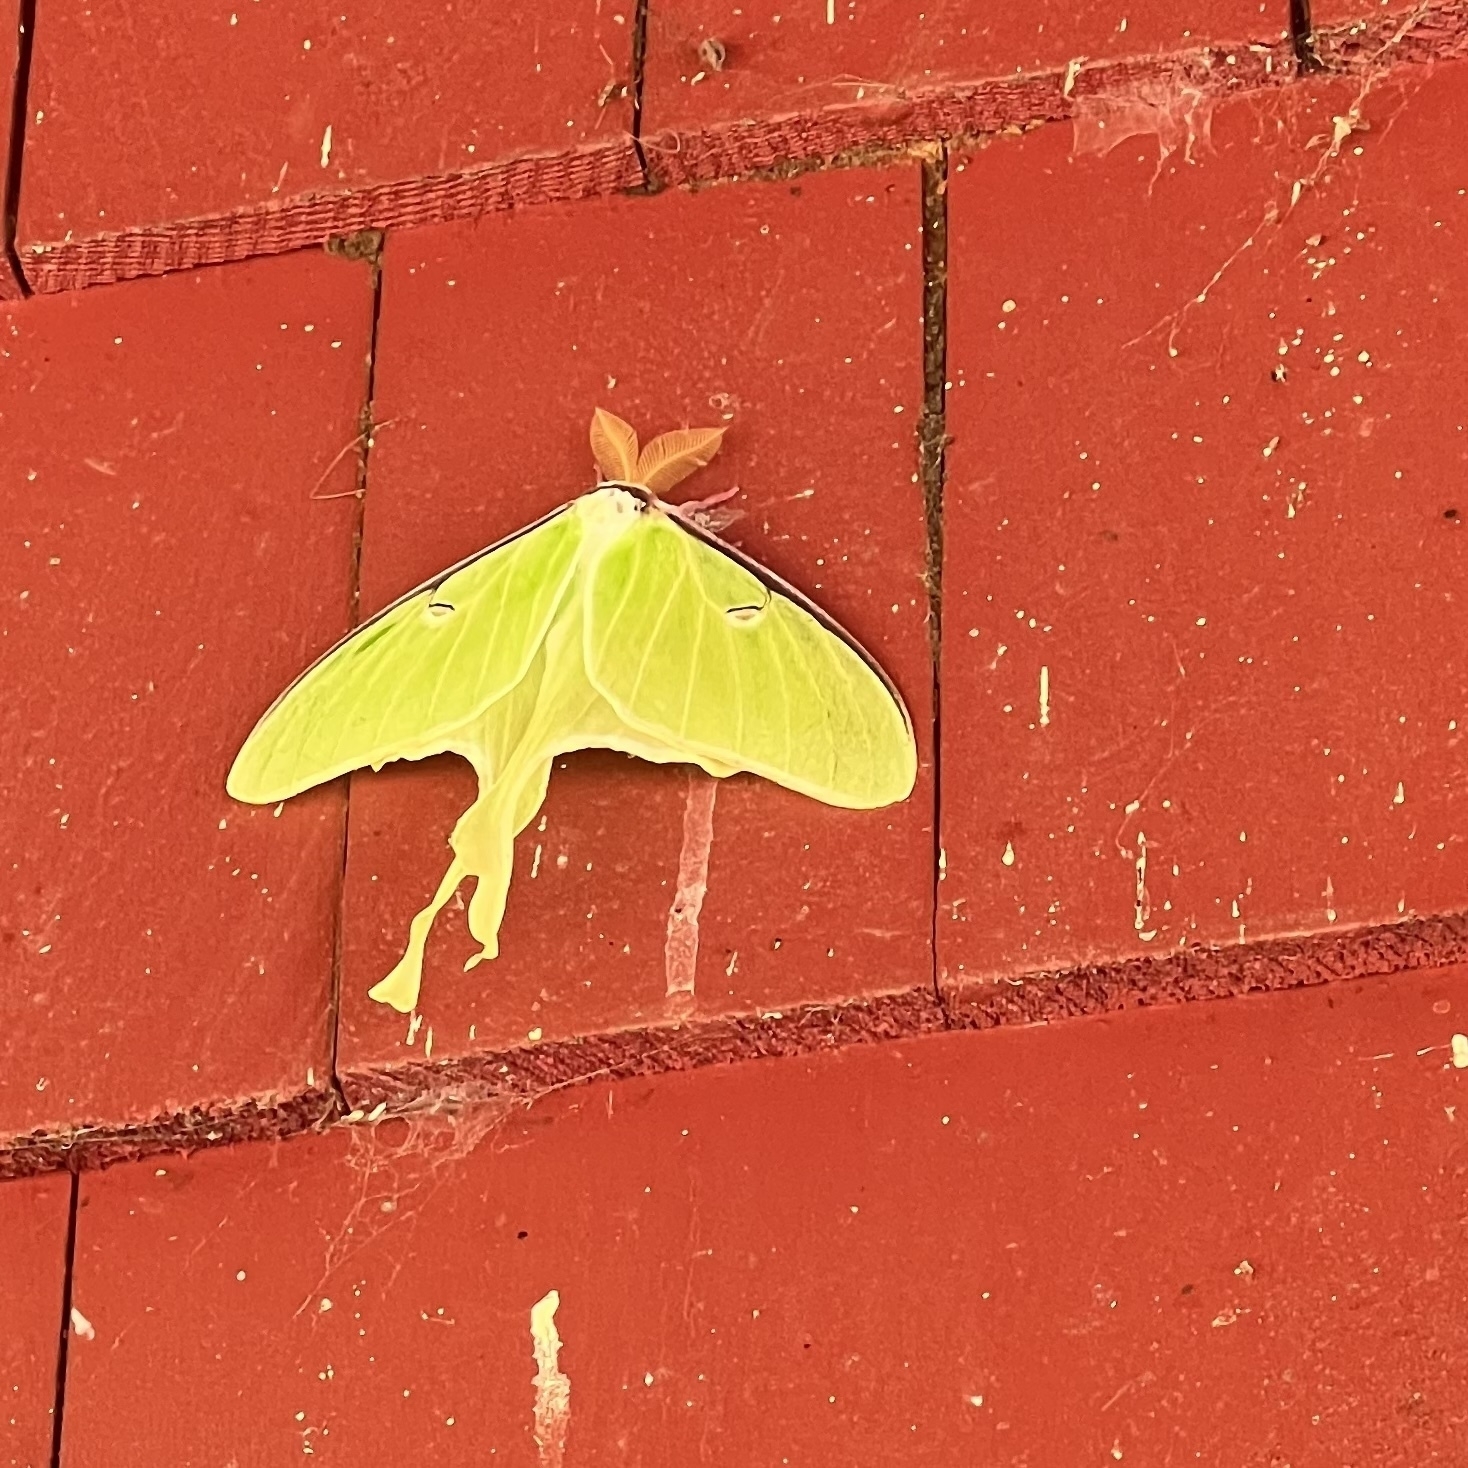 large, green moth in daylight against red shingles